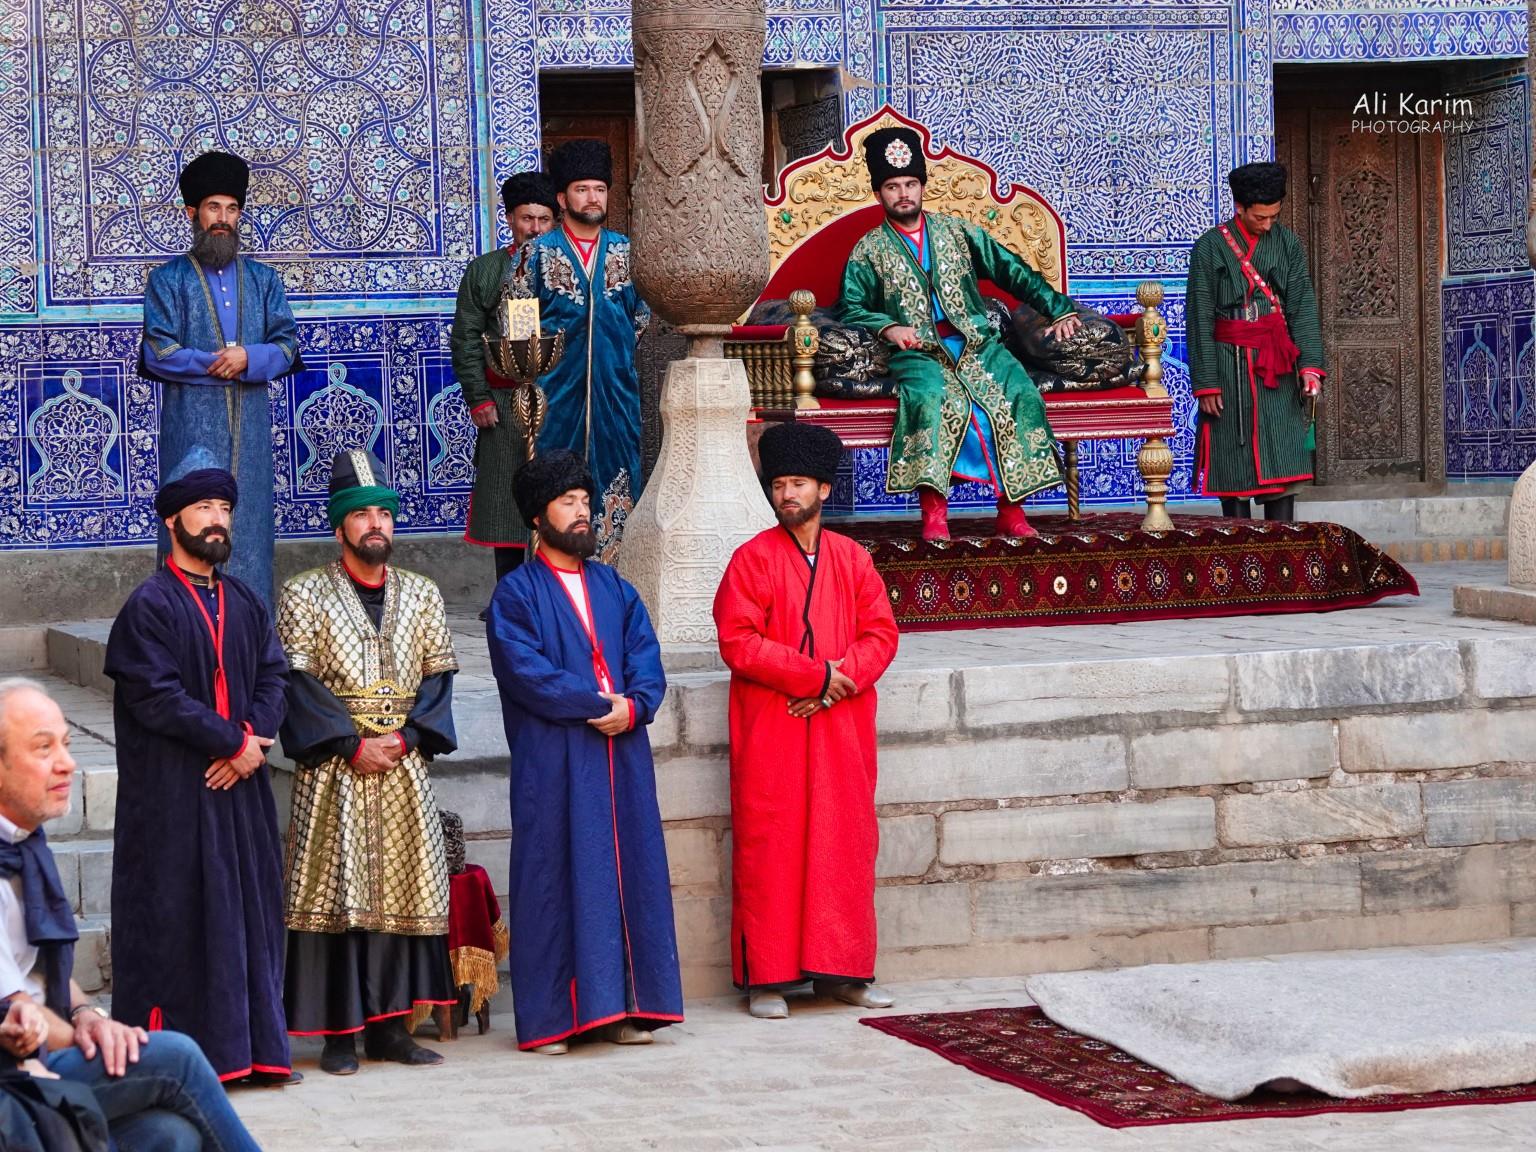 Khiva, Oct 2019, The king, his vizier and senior officials; in the play